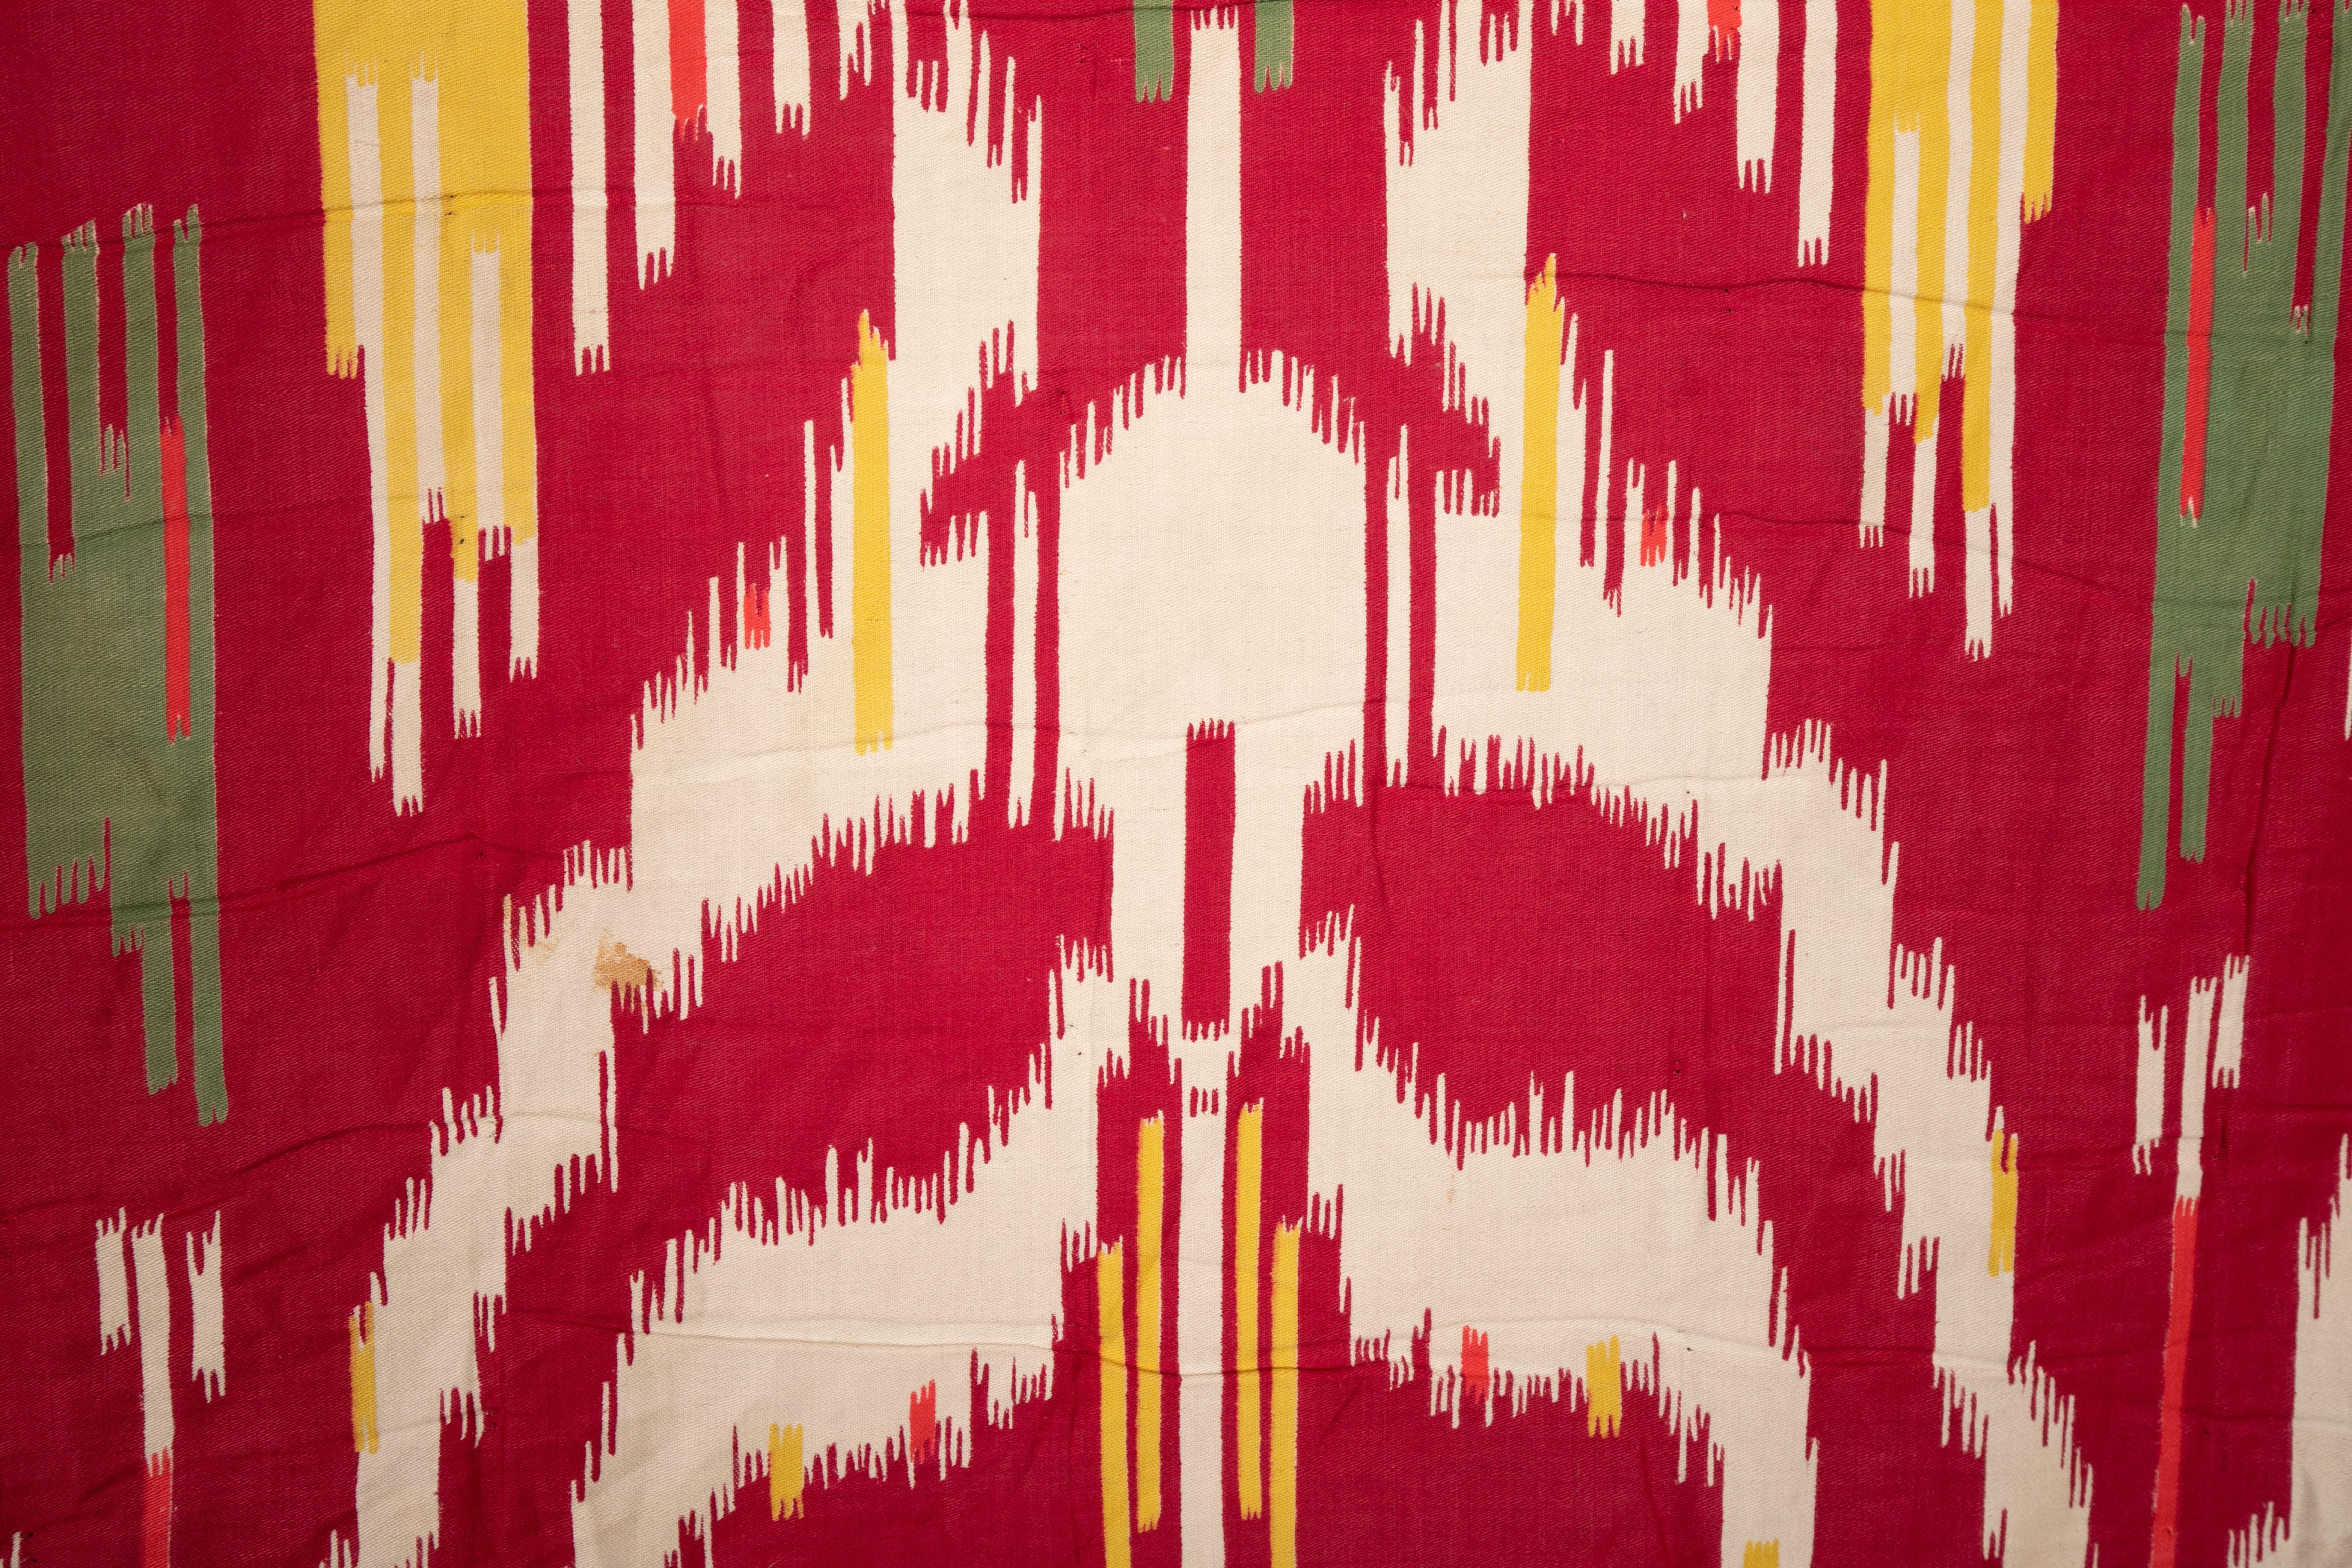 Russian Printed Ikat Design Cotton Fabric Panel, Mid-20th Century or Earlier For Sale 2